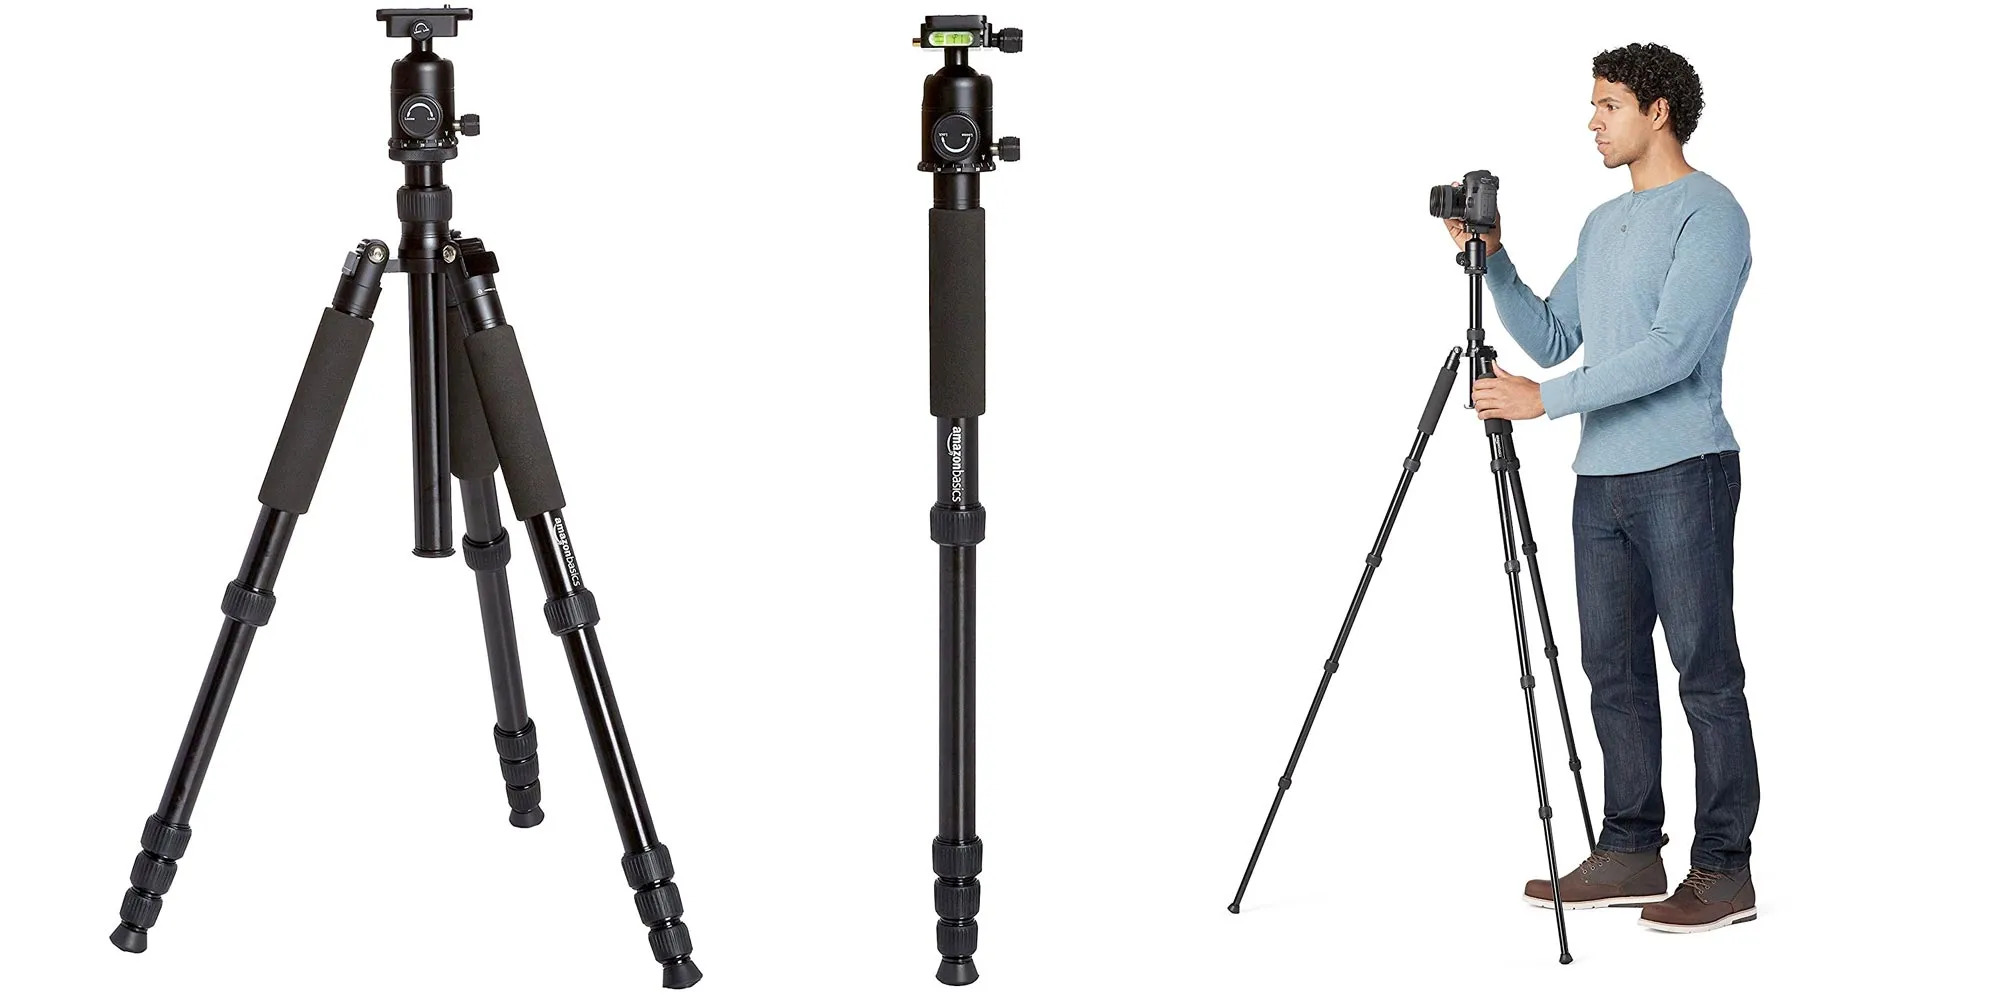 AmazonBasics Tripod Review: The Best For Beginners